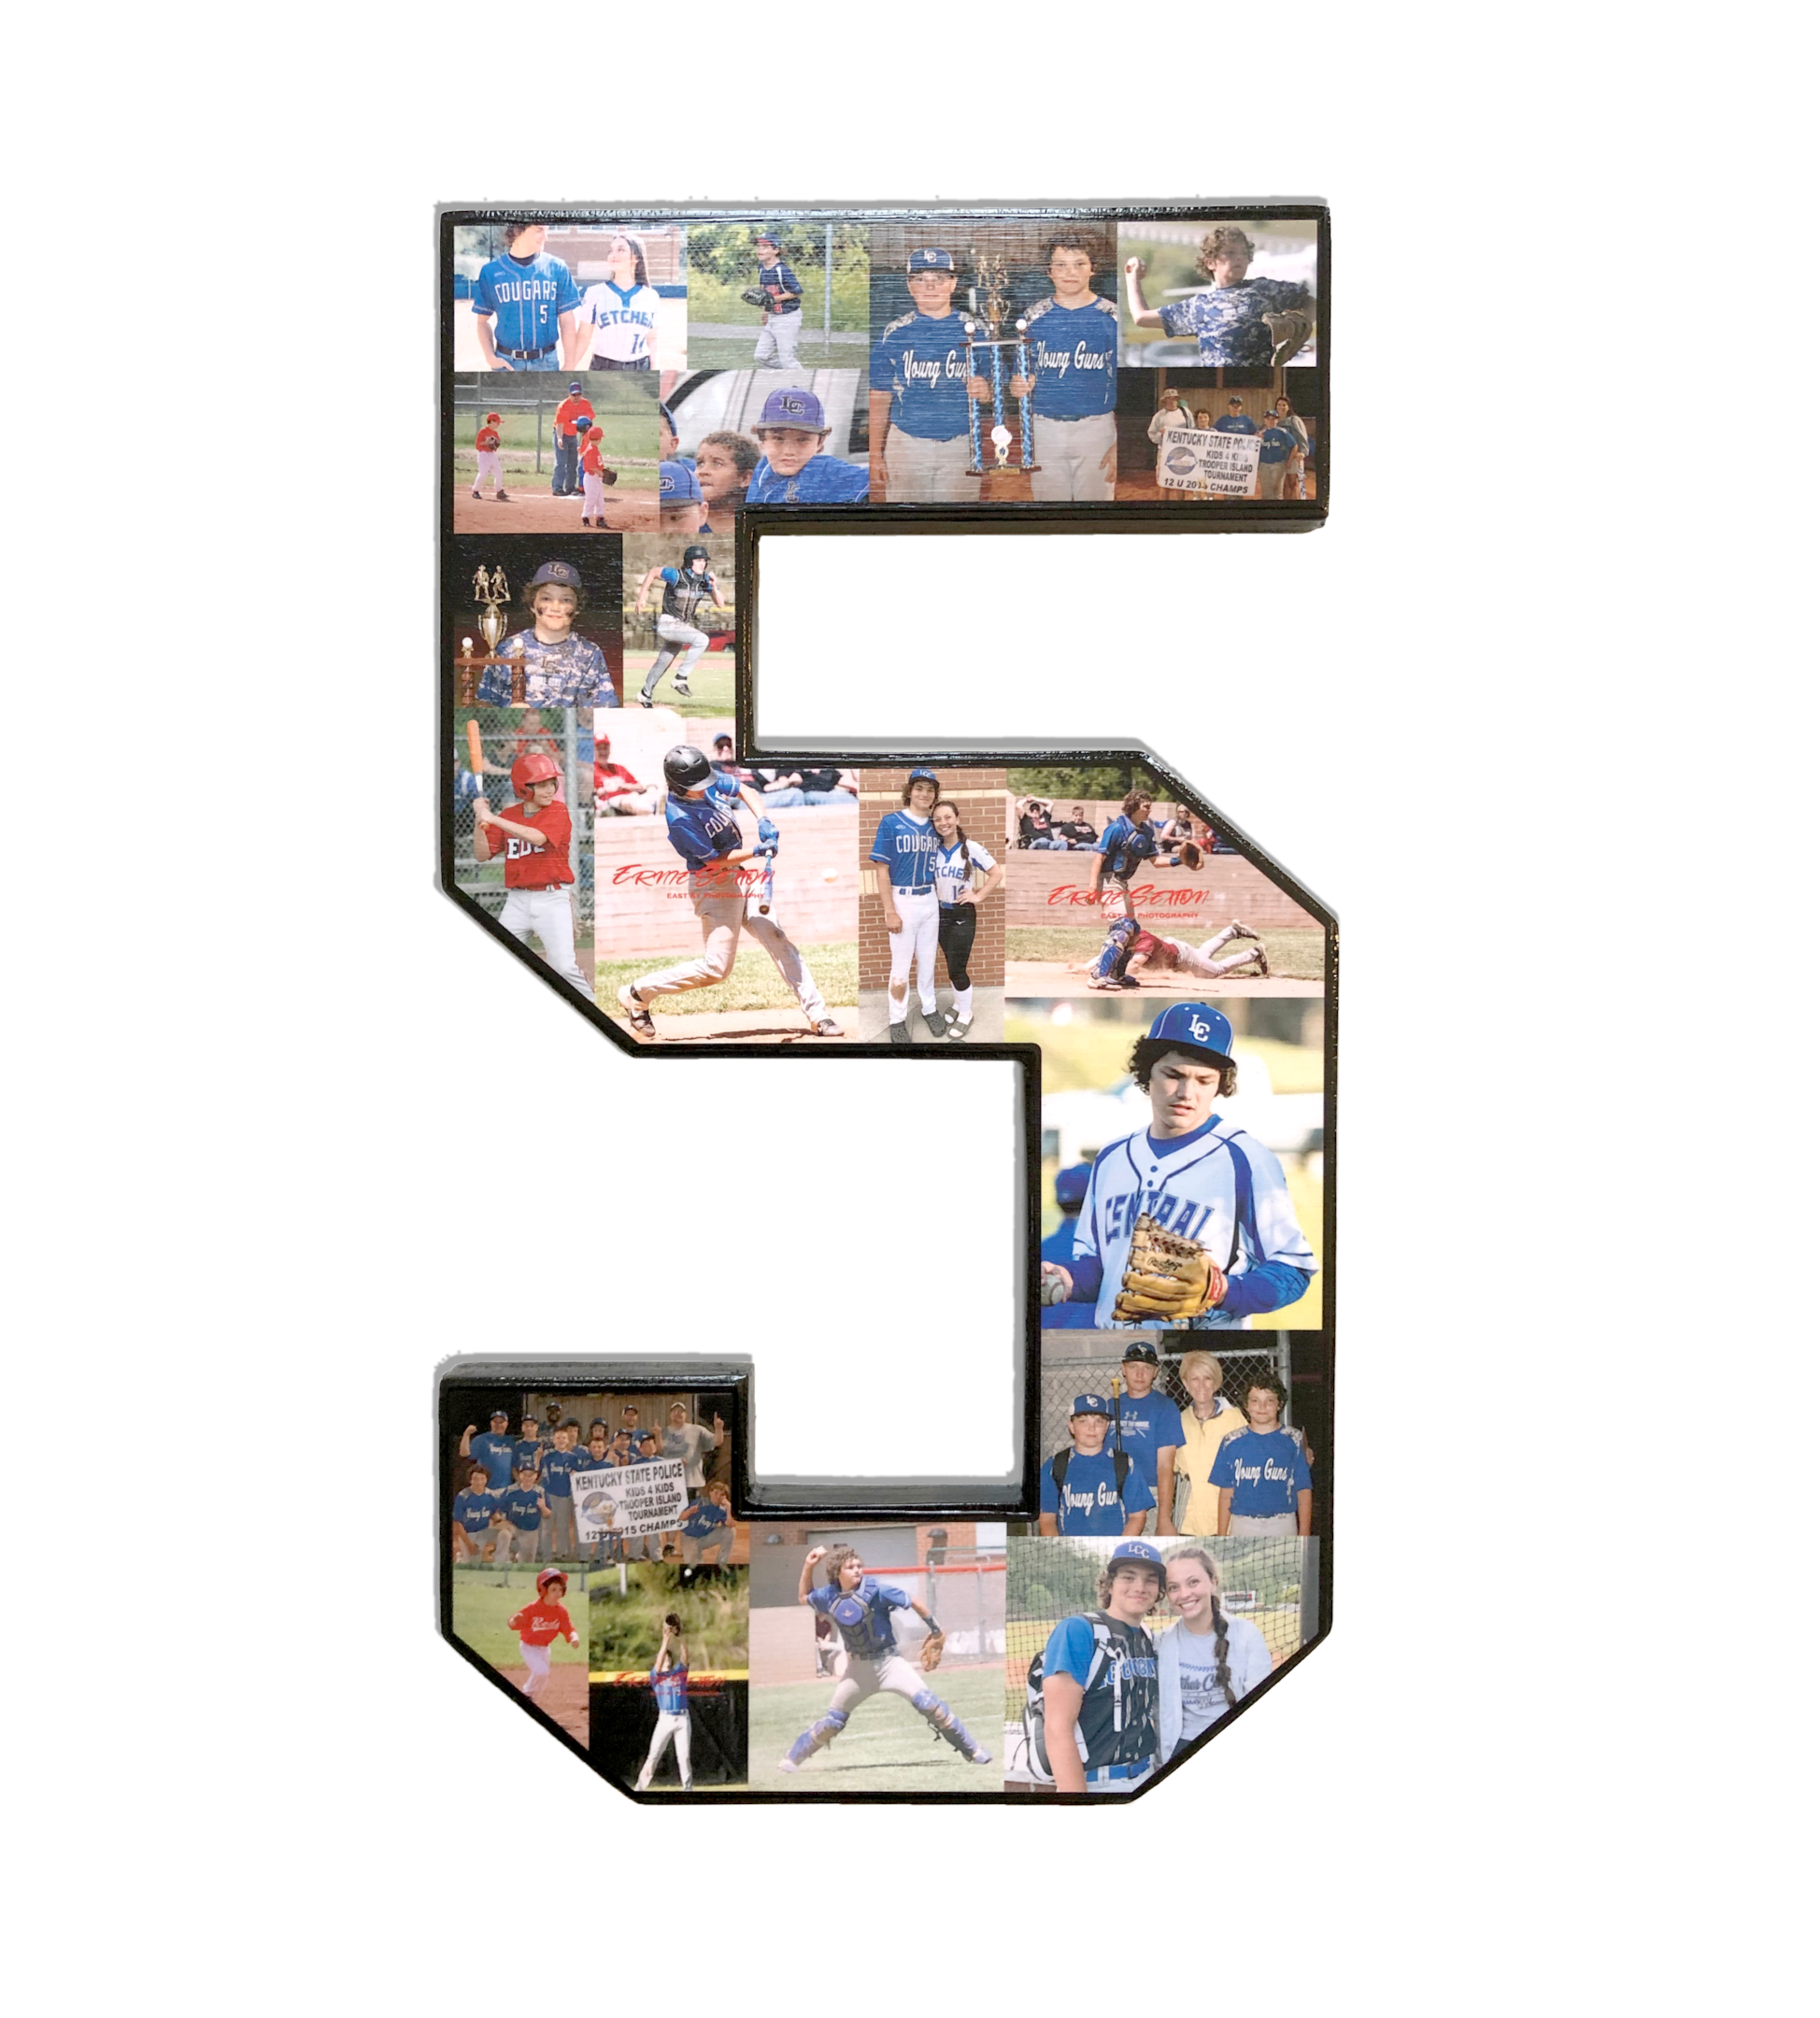 We've been making senior year collages since 2013. Like this #5 collage.